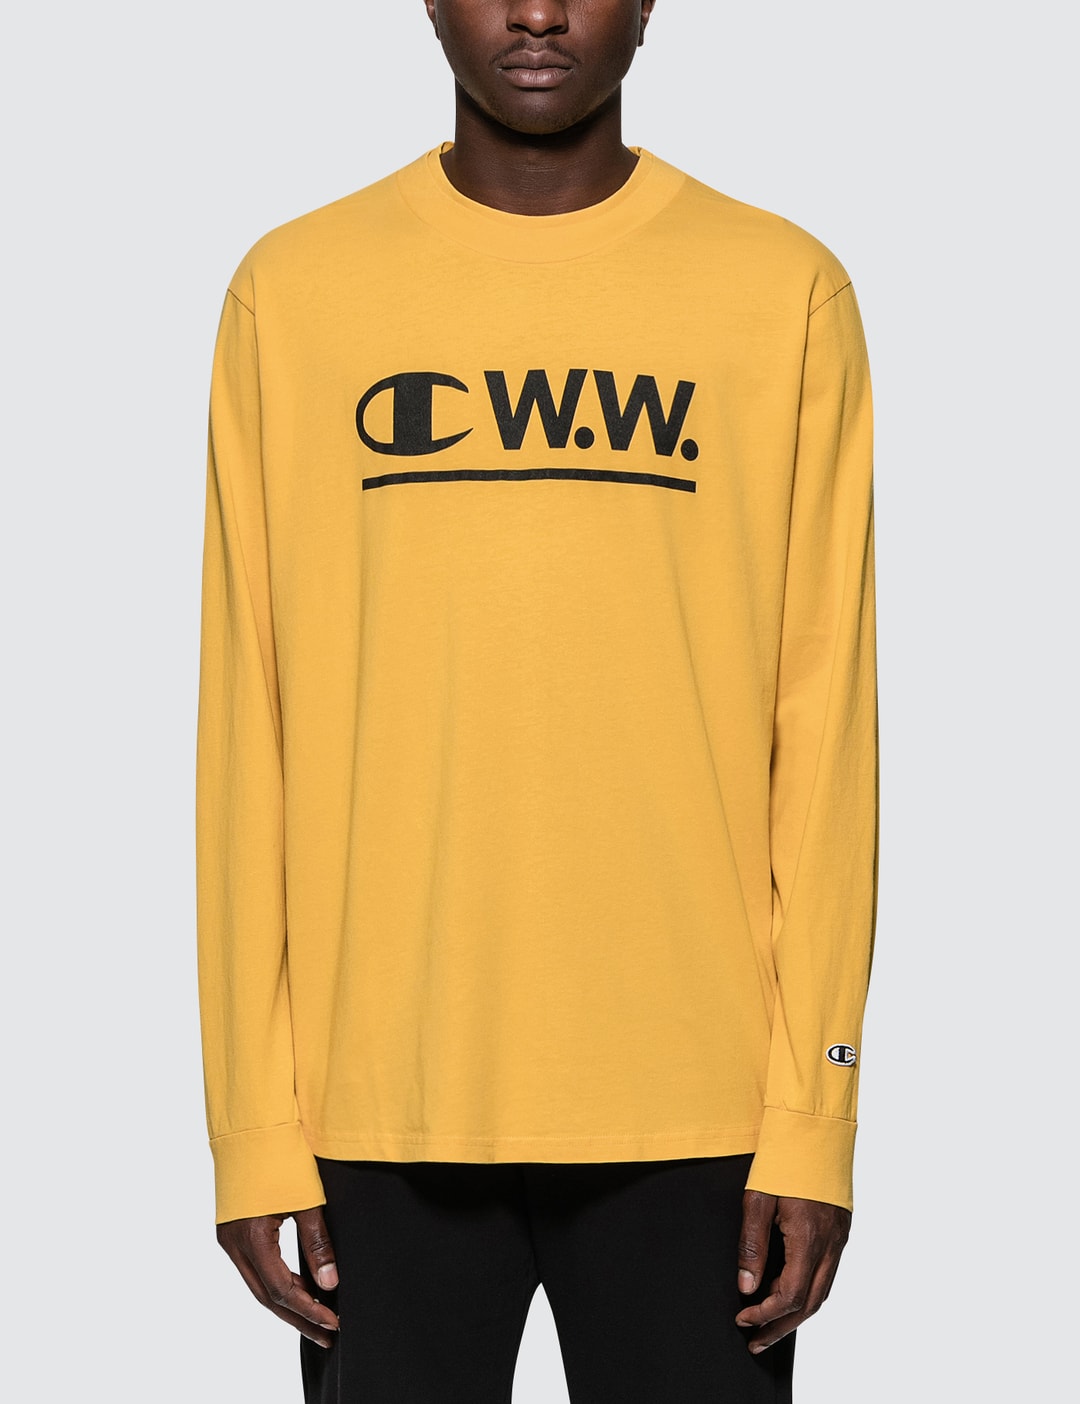 Metode Overlegenhed Byttehandel Champion Reverse Weave - Wood Wood x Champion Logo L/S T-Shirt | HBX -  Globally Curated Fashion and Lifestyle by Hypebeast